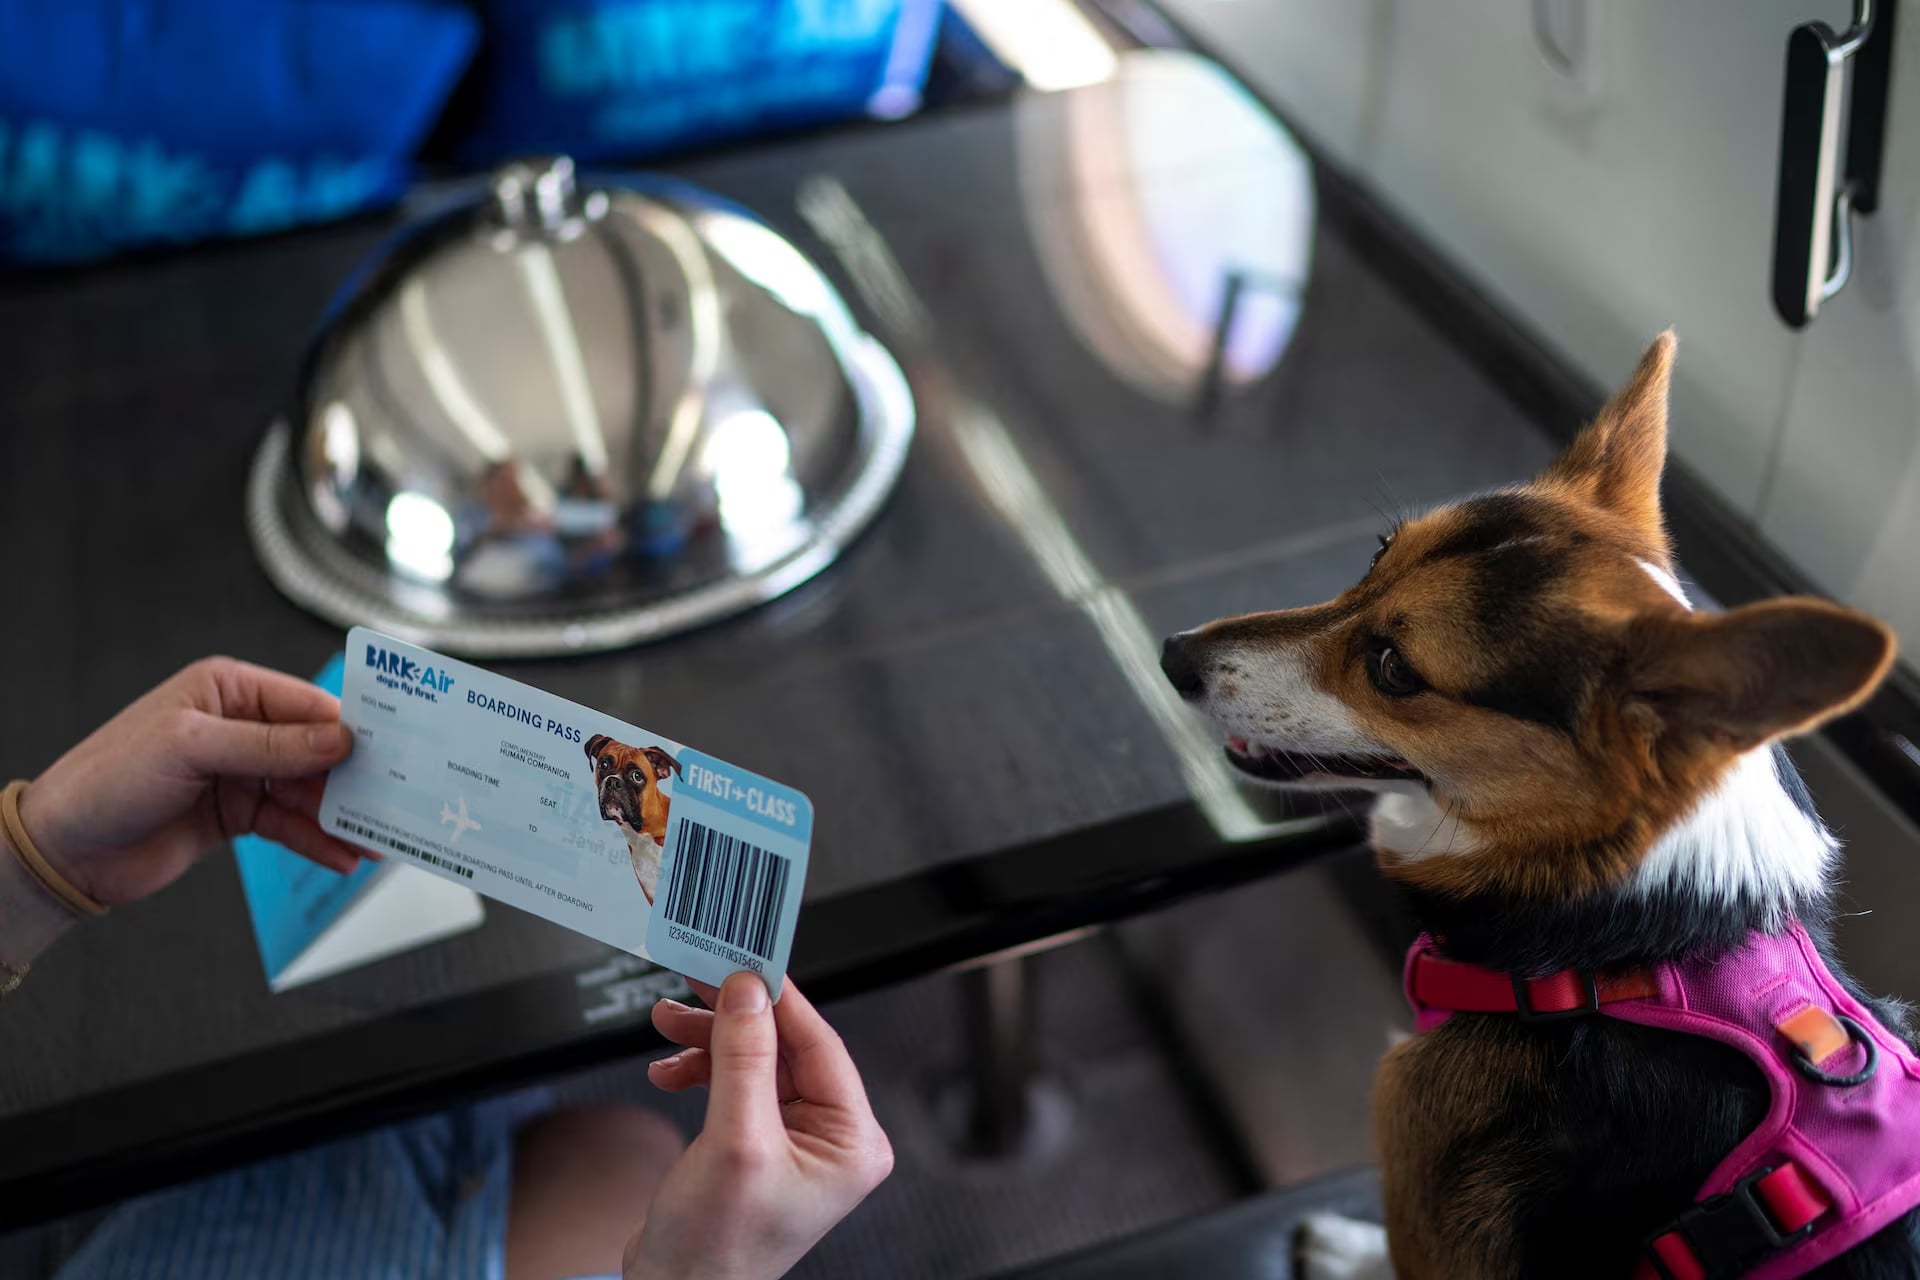 A woman shows a dog’s boarding pass after boarding a plane during a press event introducing Bark Air, an airline for dogs, at Republic Airport in East Farmingdale, New York, May 21. Photo: Reuters